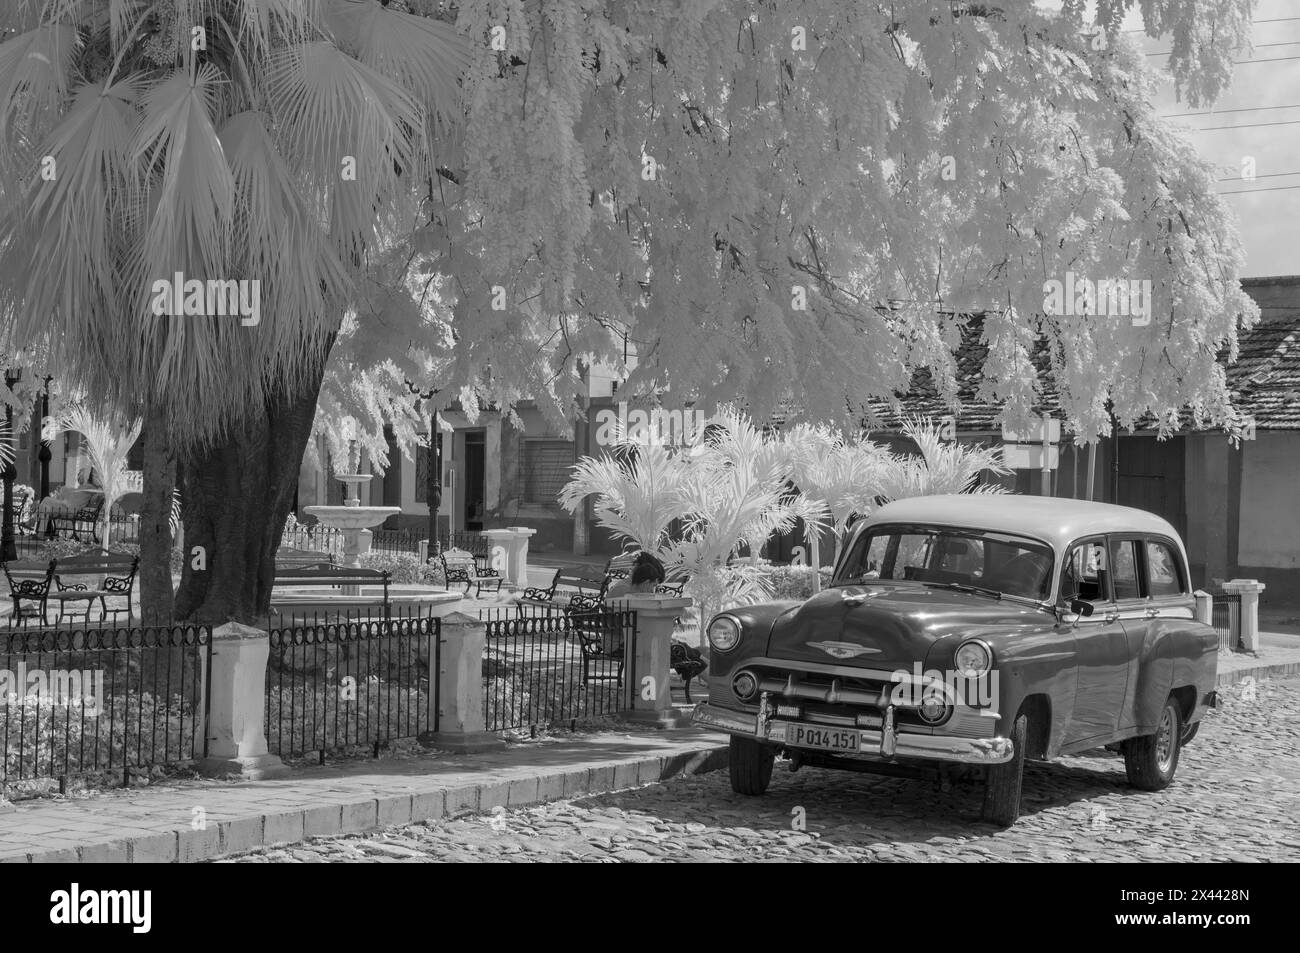 An infrared picture of a restored, vintage Classic American Car in the Plaza Sant Ana, Trinidad, Cuba. Stock Photo